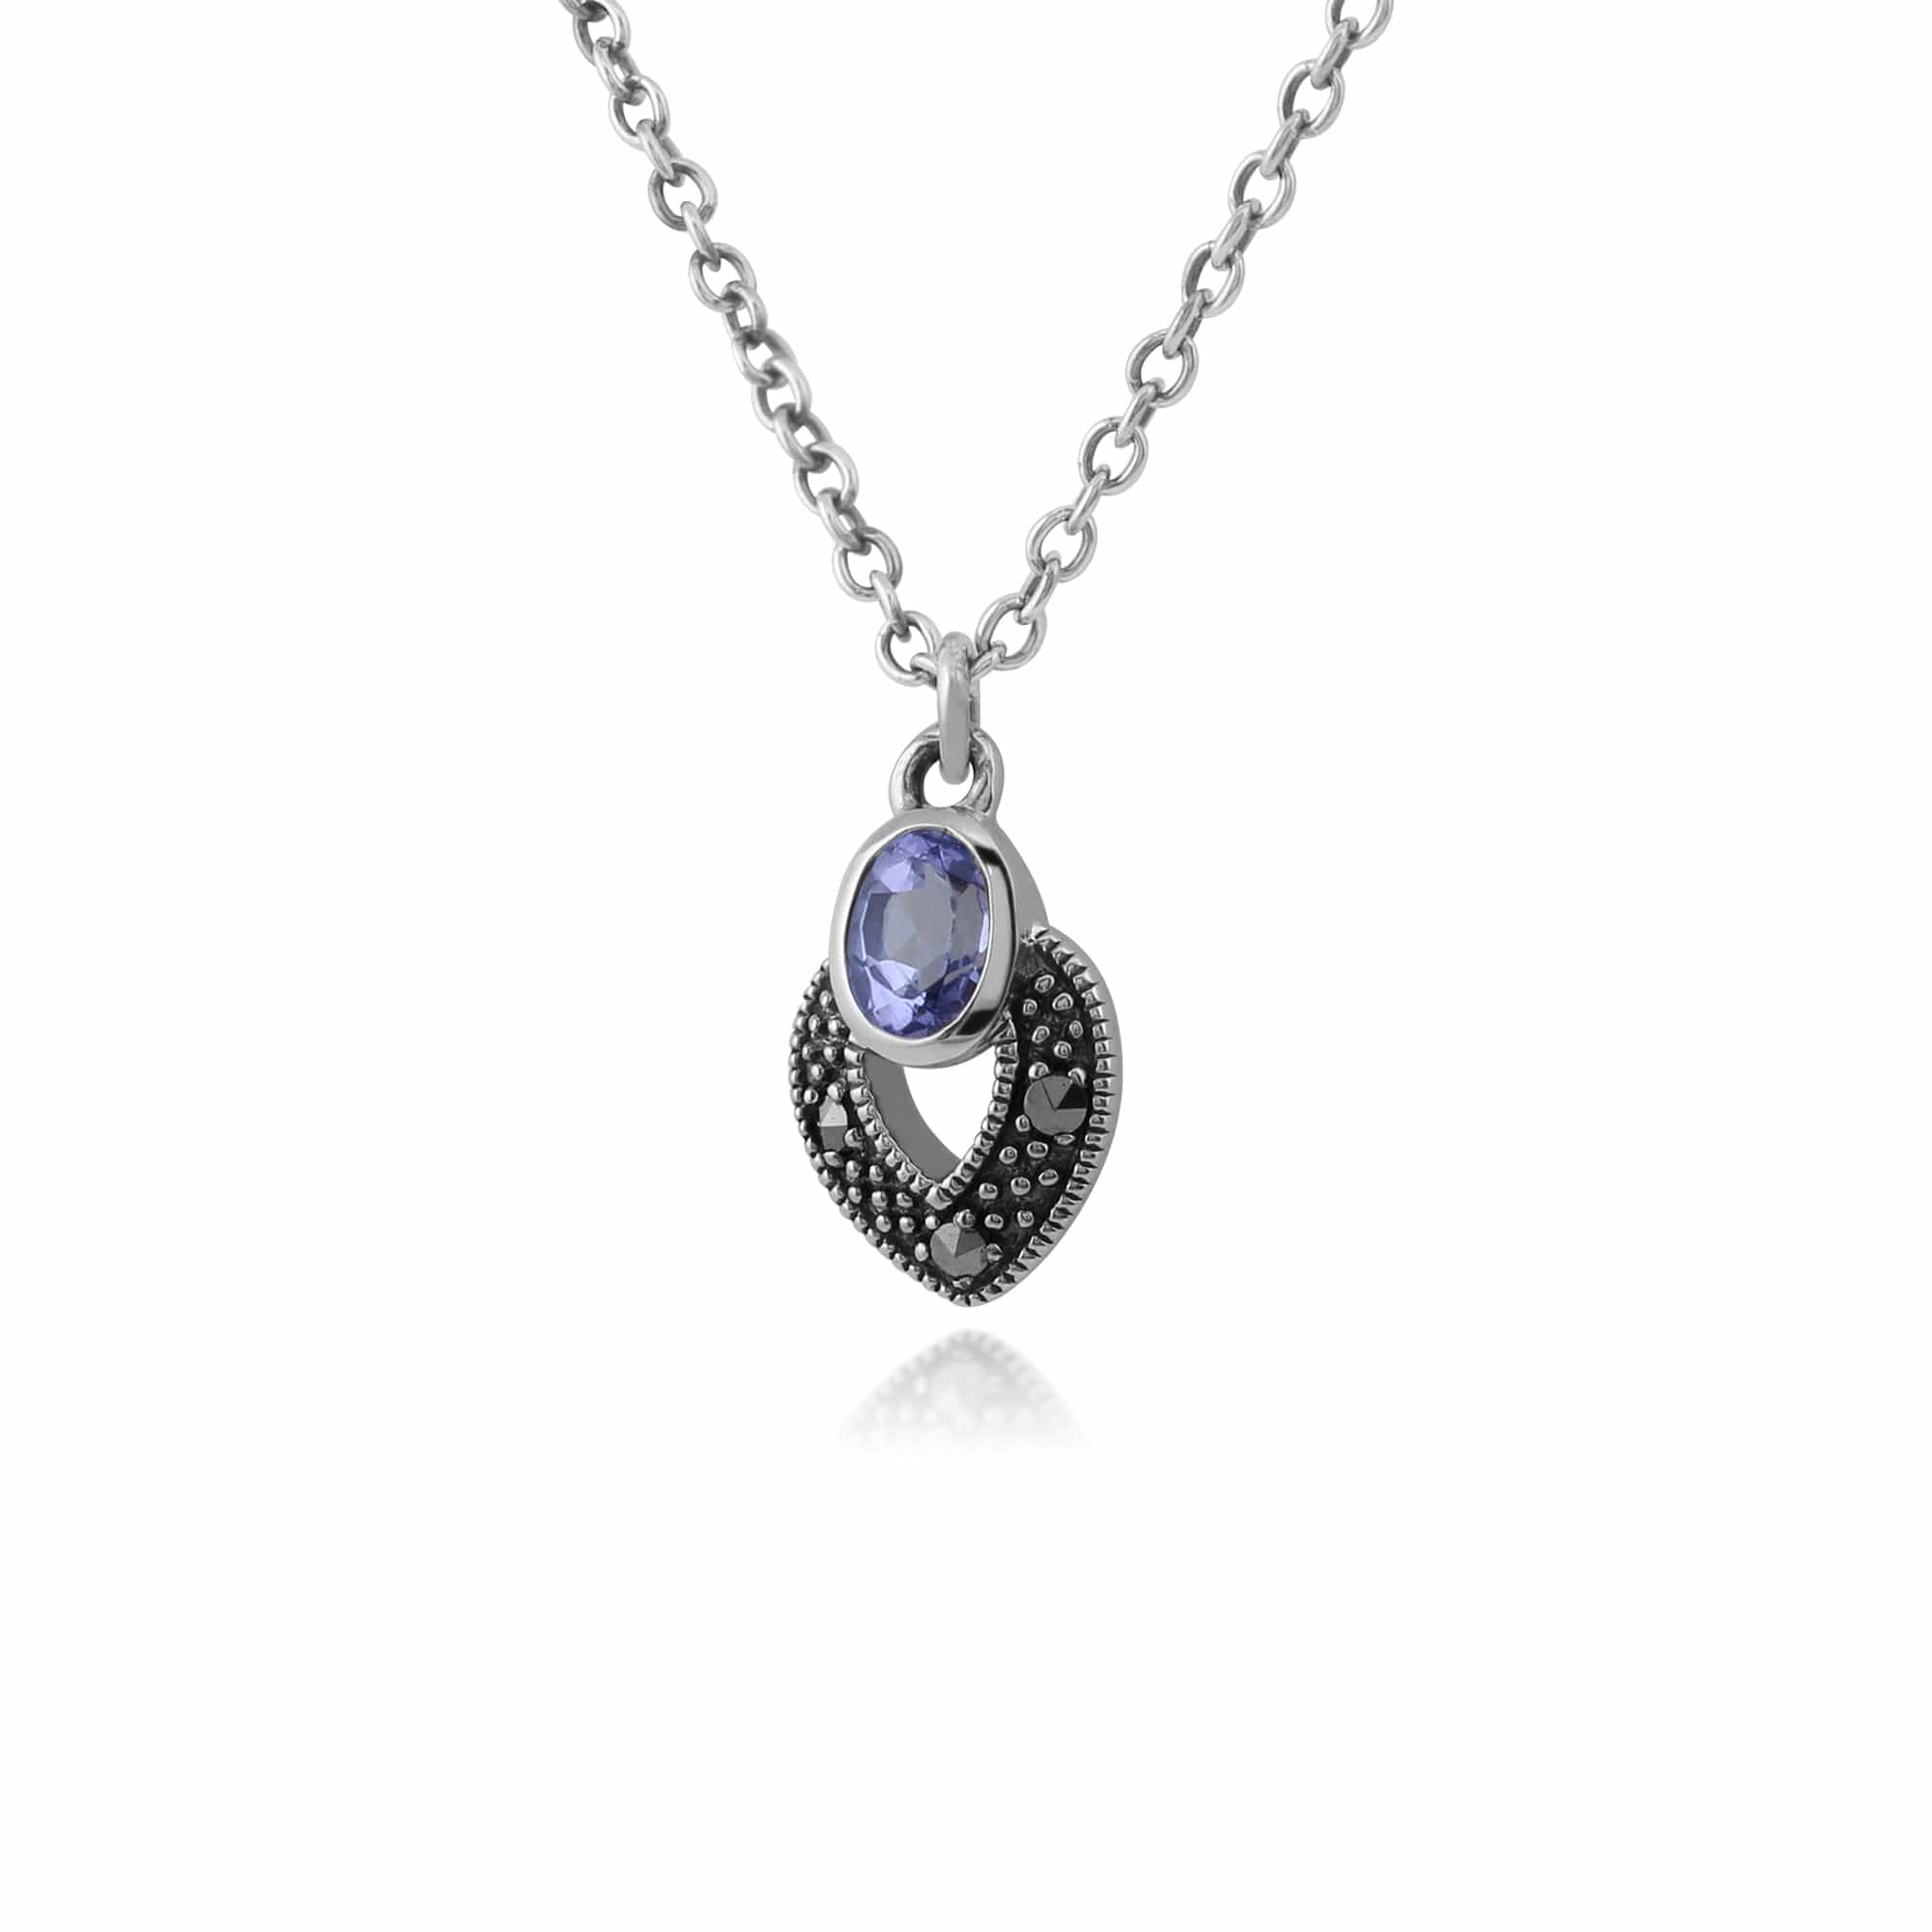 214N688208925 Art Deco Style Oval Tanzanite & Marcasite Necklace in 925 Sterling Silver 2